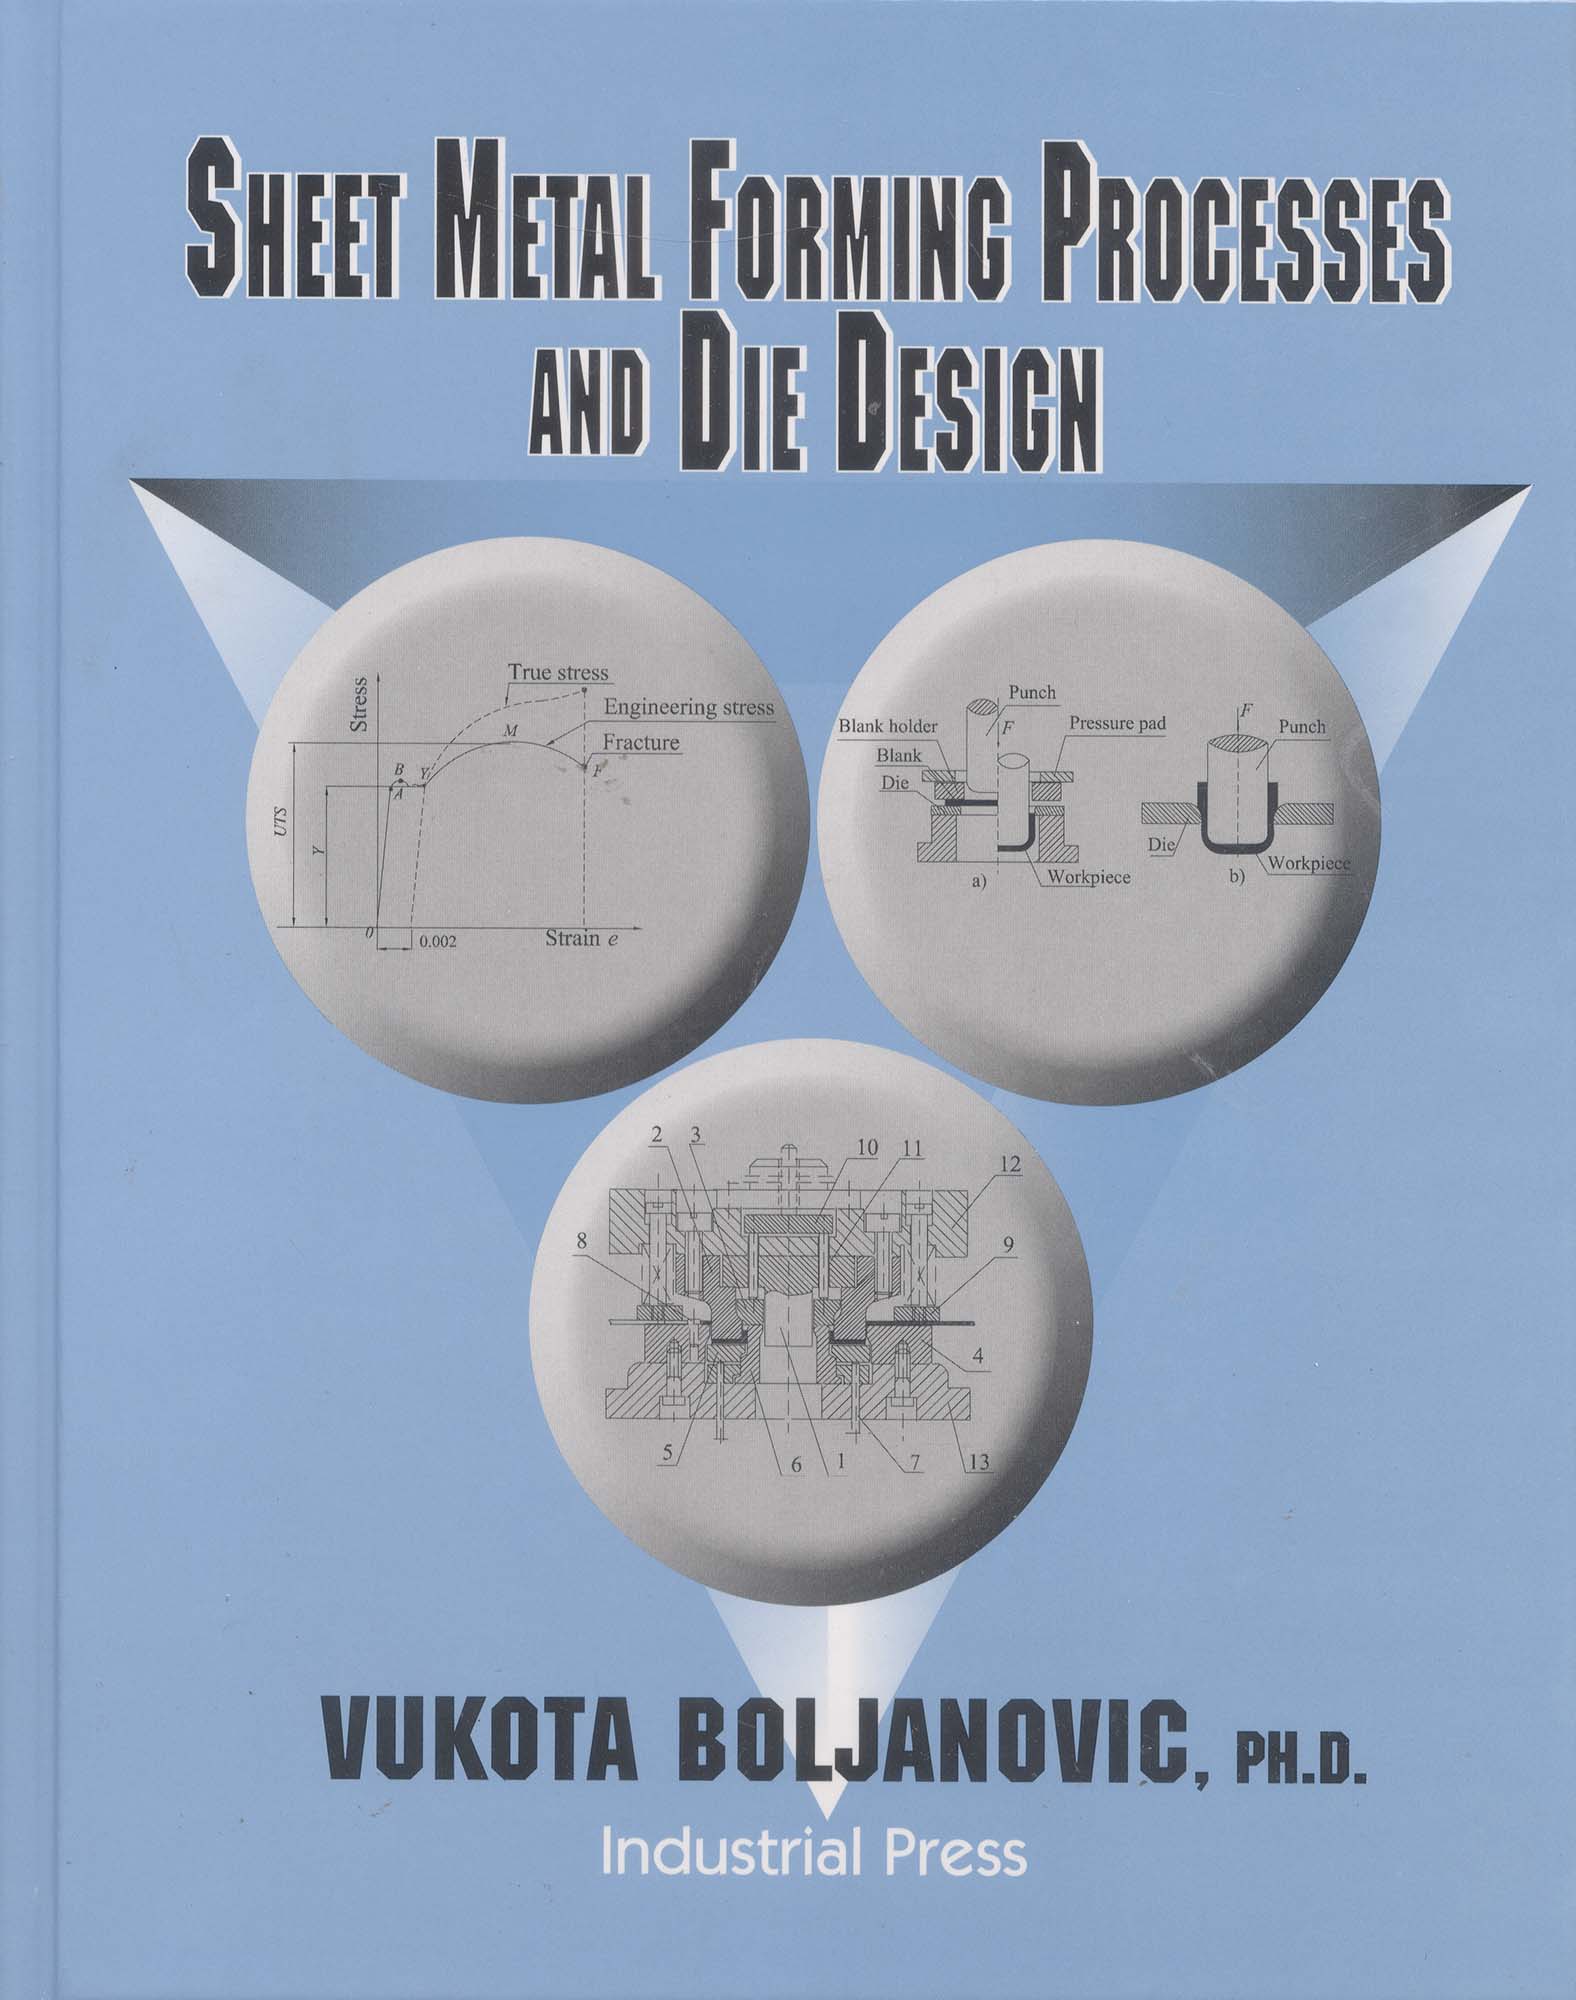 Book-Sheet Metal Forming Processes - 2nd ed